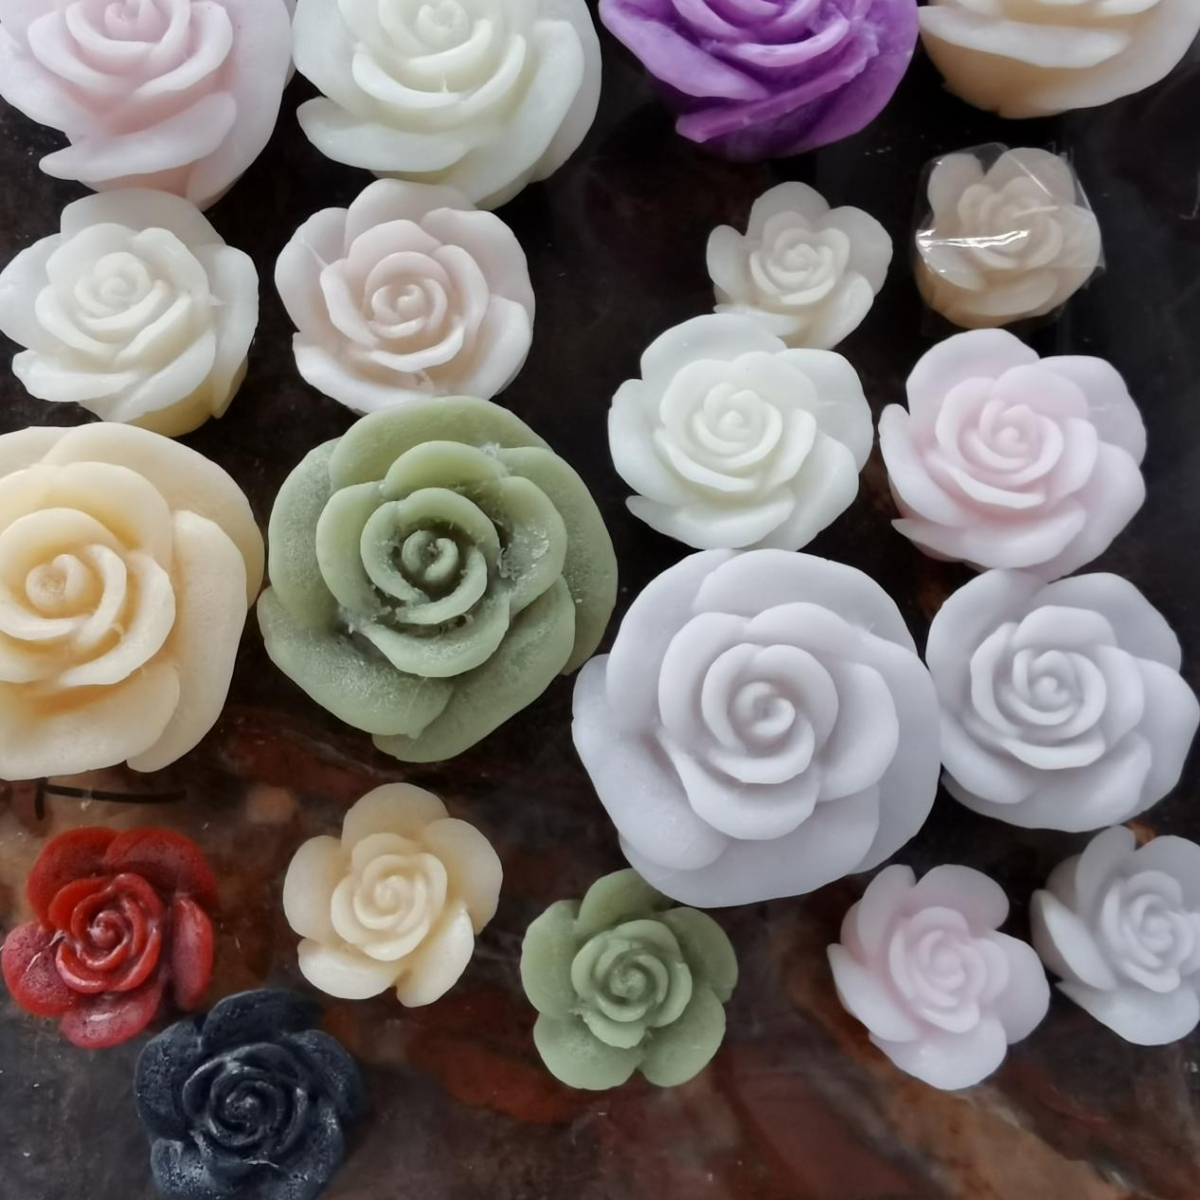 Flower Candles -Natural Fragrance ,Shaped Rose Flower ,Vegan Candles ,China Factory ,Price-HOWCANDLE-Candles,Scented Candles,Aromatherapy Candles,Soy Candles,Vegan Candles,Jar Candles,Pillar Candles,Candle Gift Sets,Essential Oils,Reed Diffuser,Candle Holder,